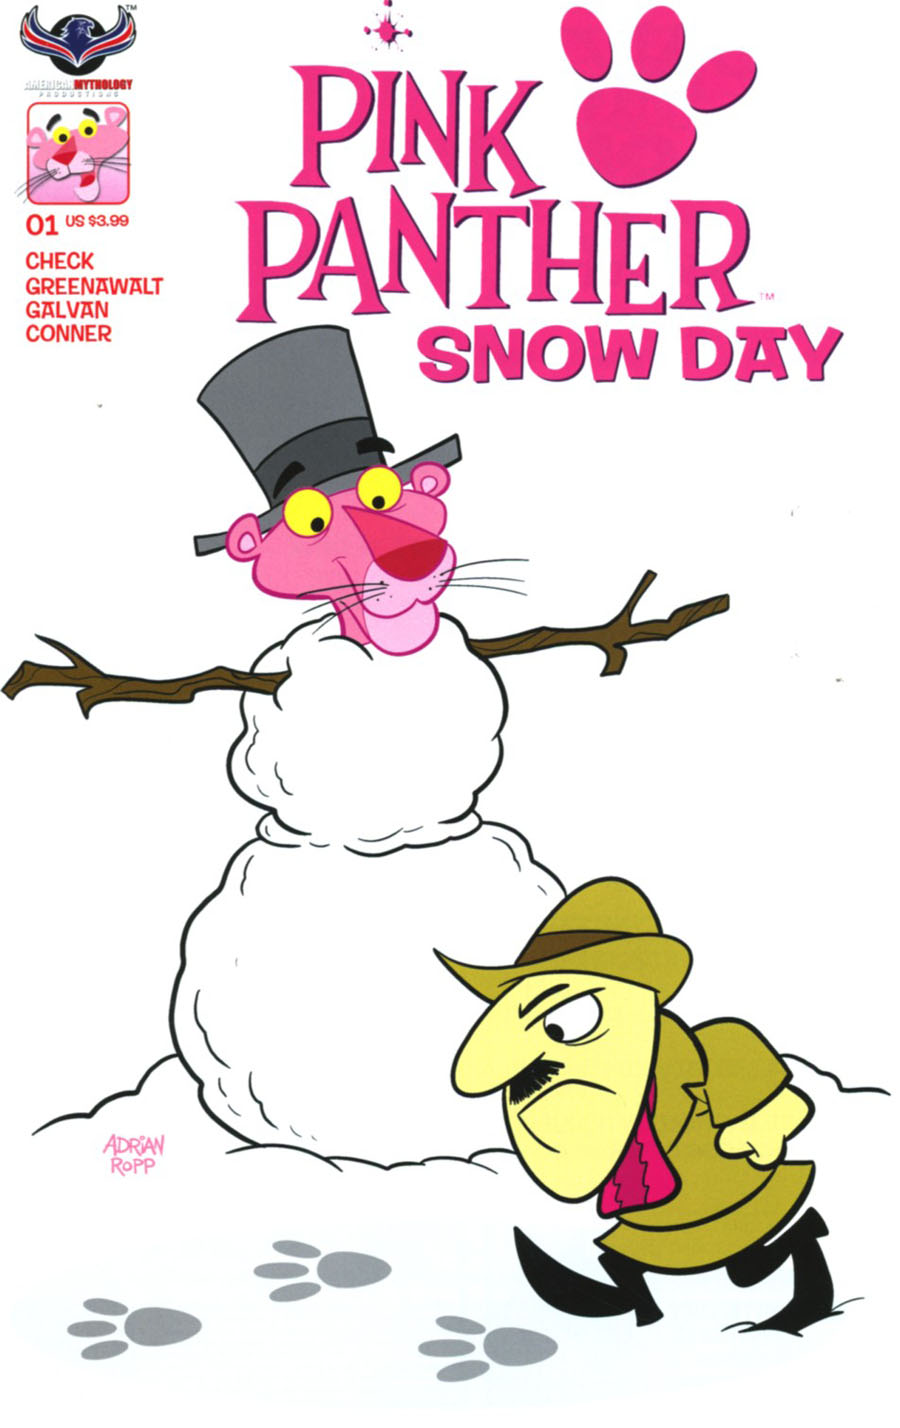 Pink Panther Snow Day Cover A Regular Adrian Ropp Cover